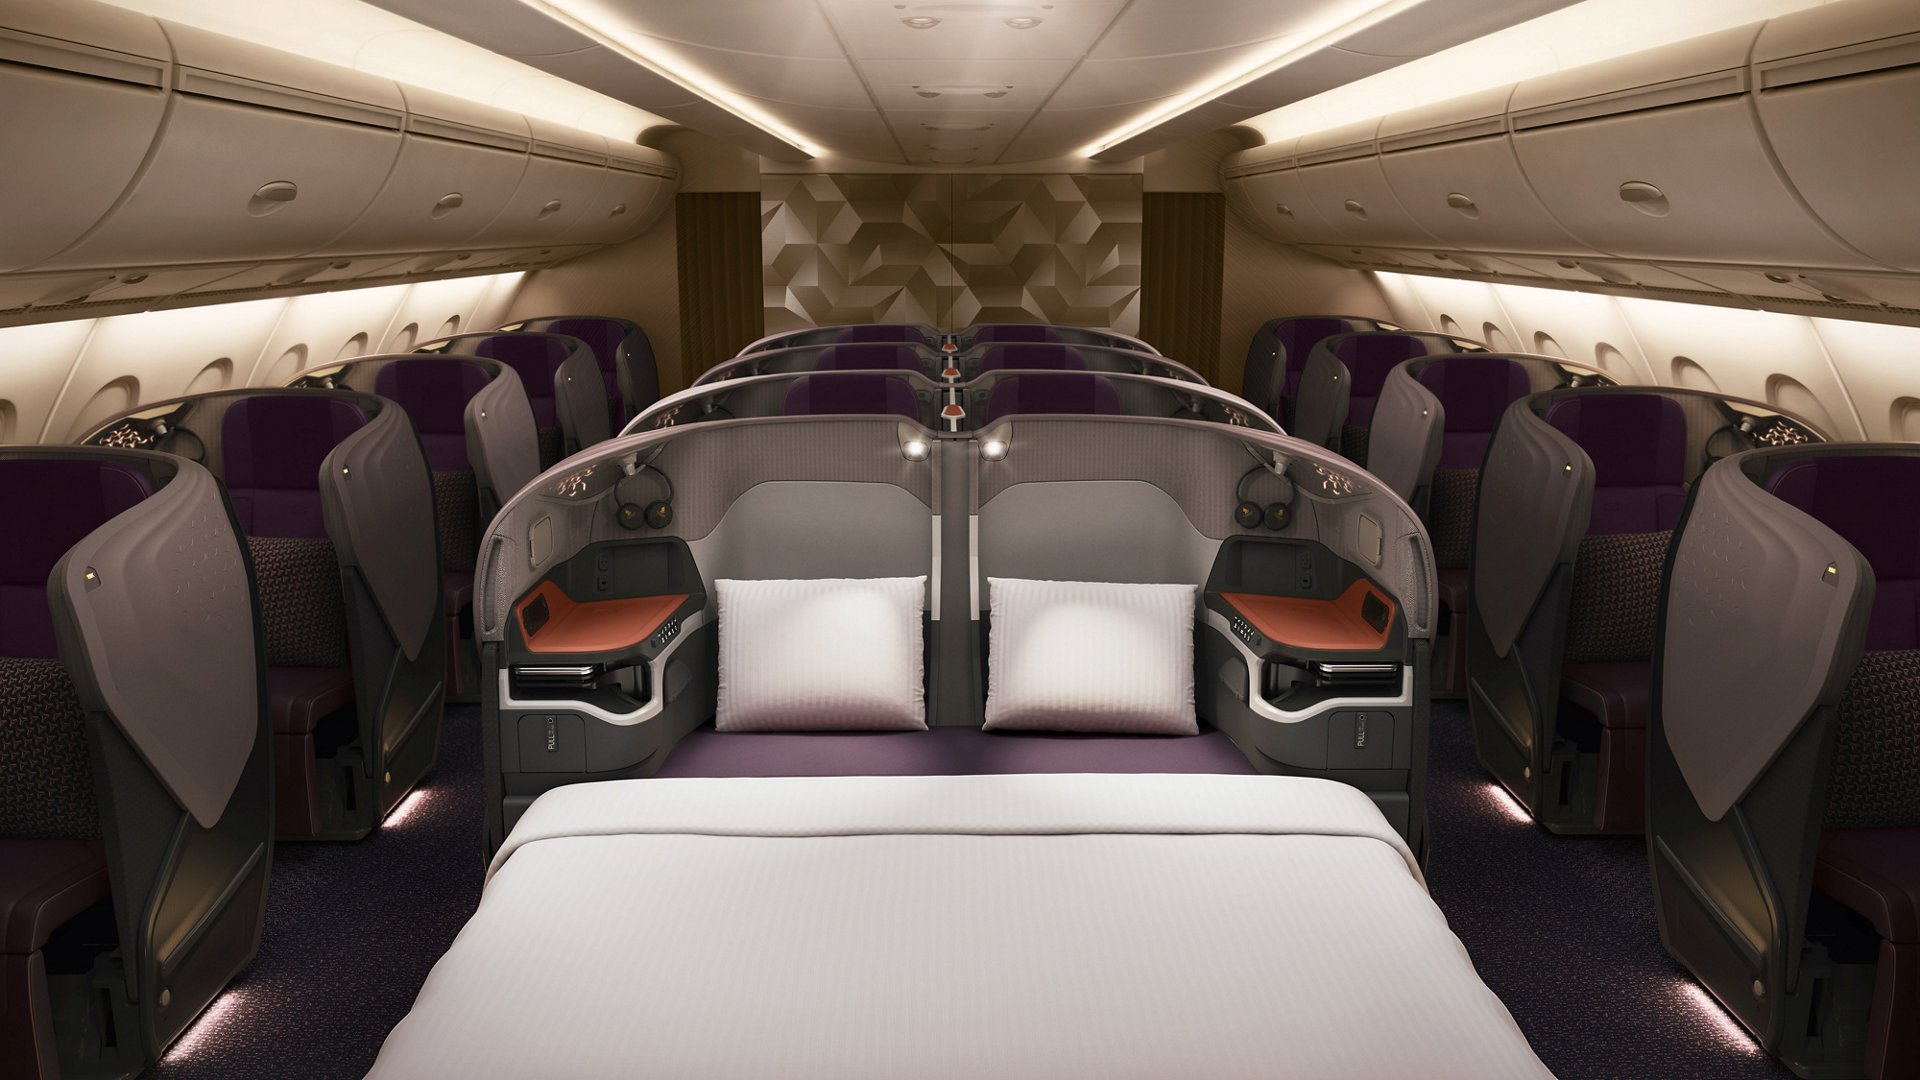 Singapore Airlines Receives The First A380 With Its